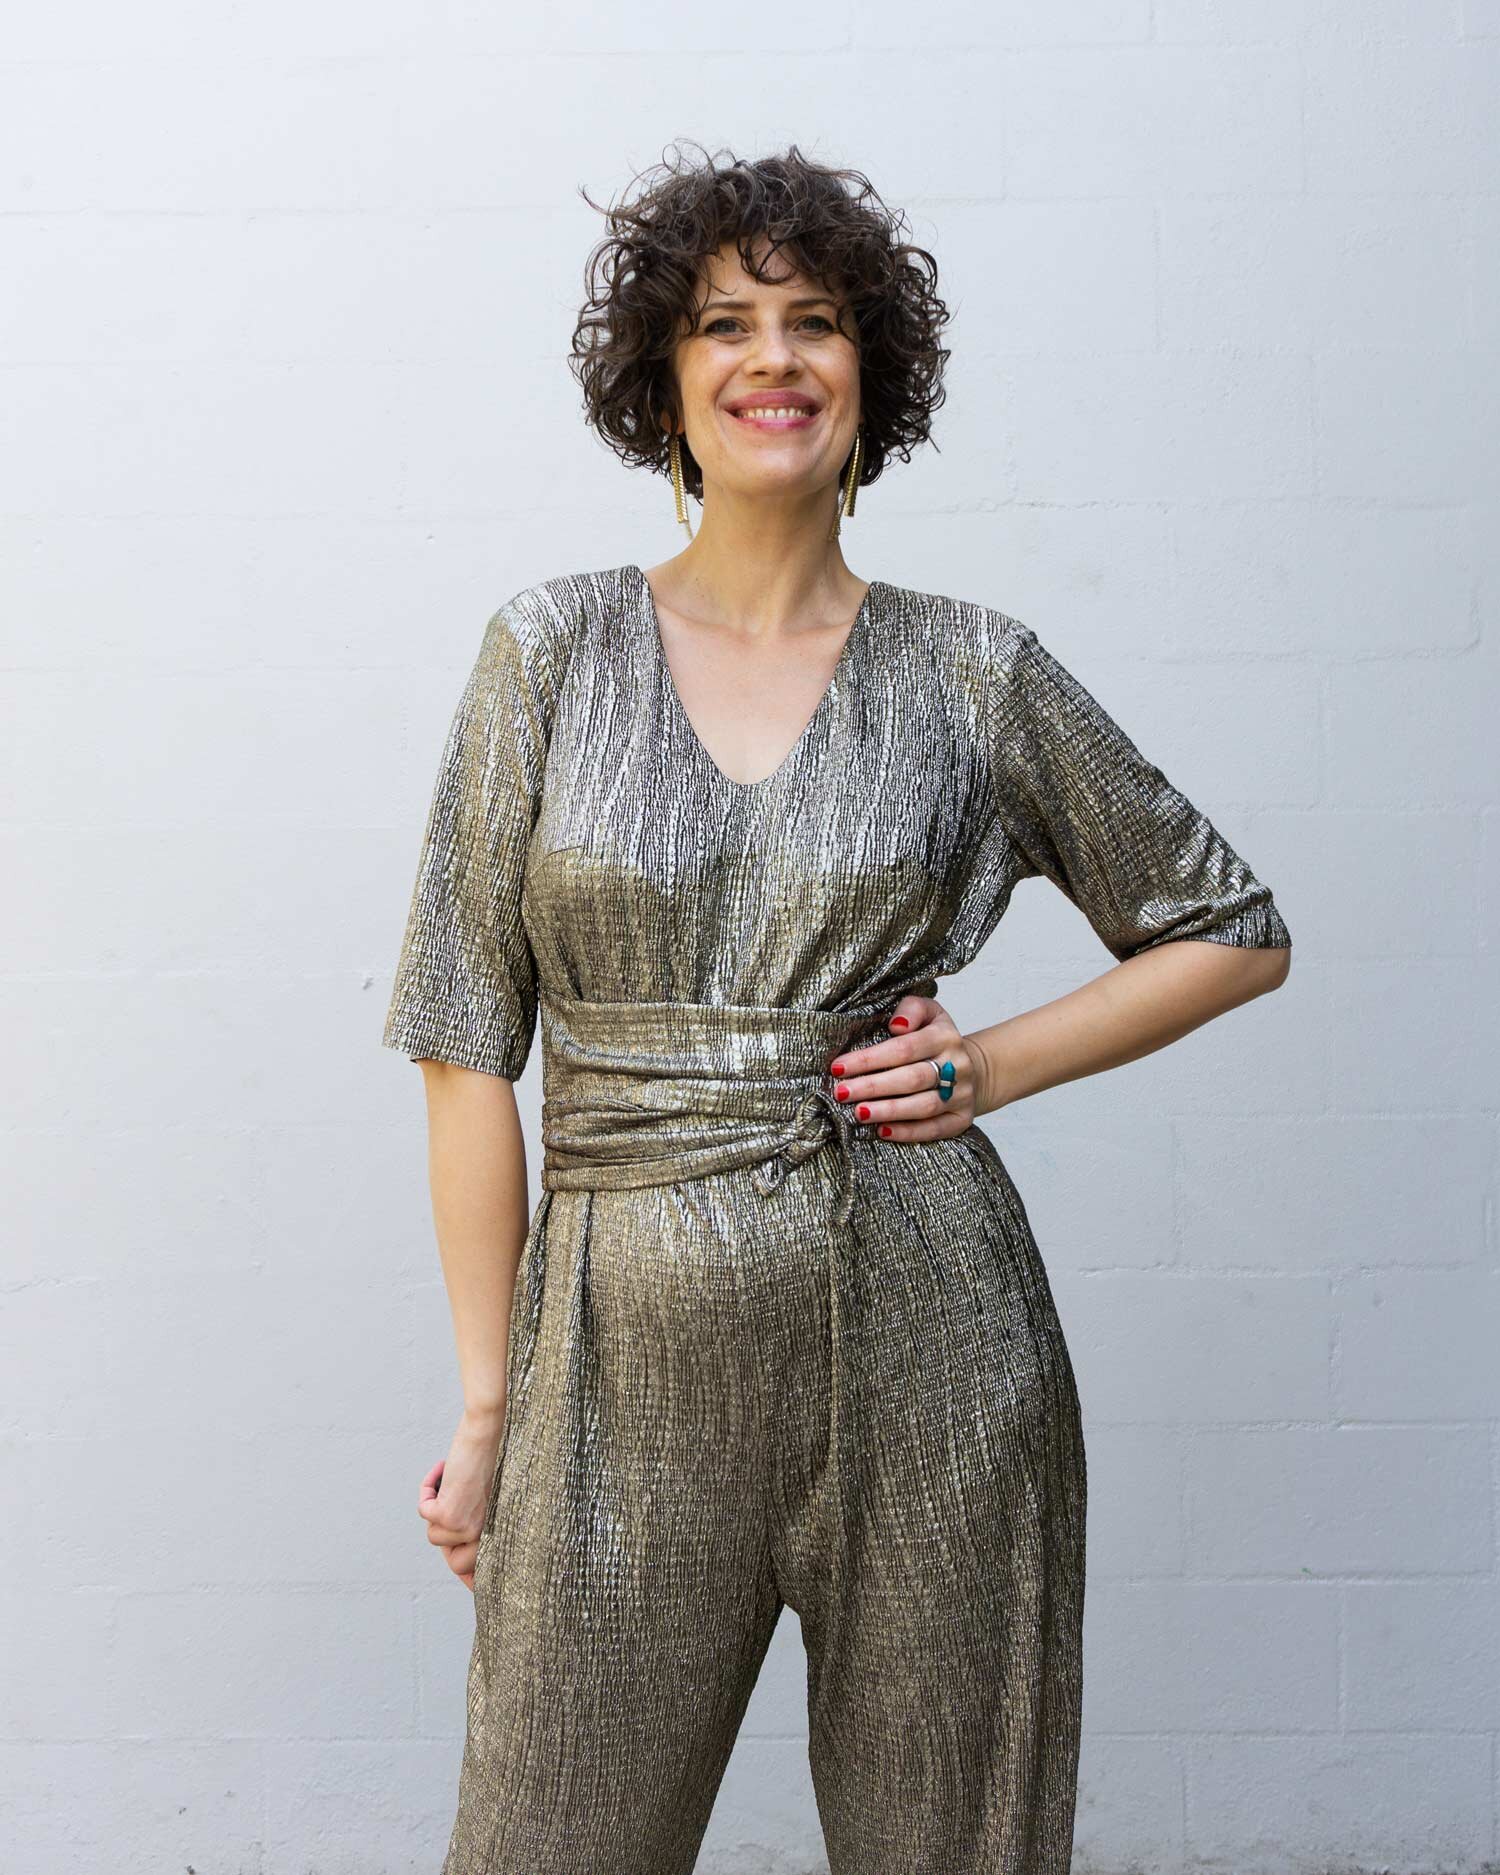 DIY Wide Leg Jumpsuit - Review of the Amy Jumpsuit pattern by